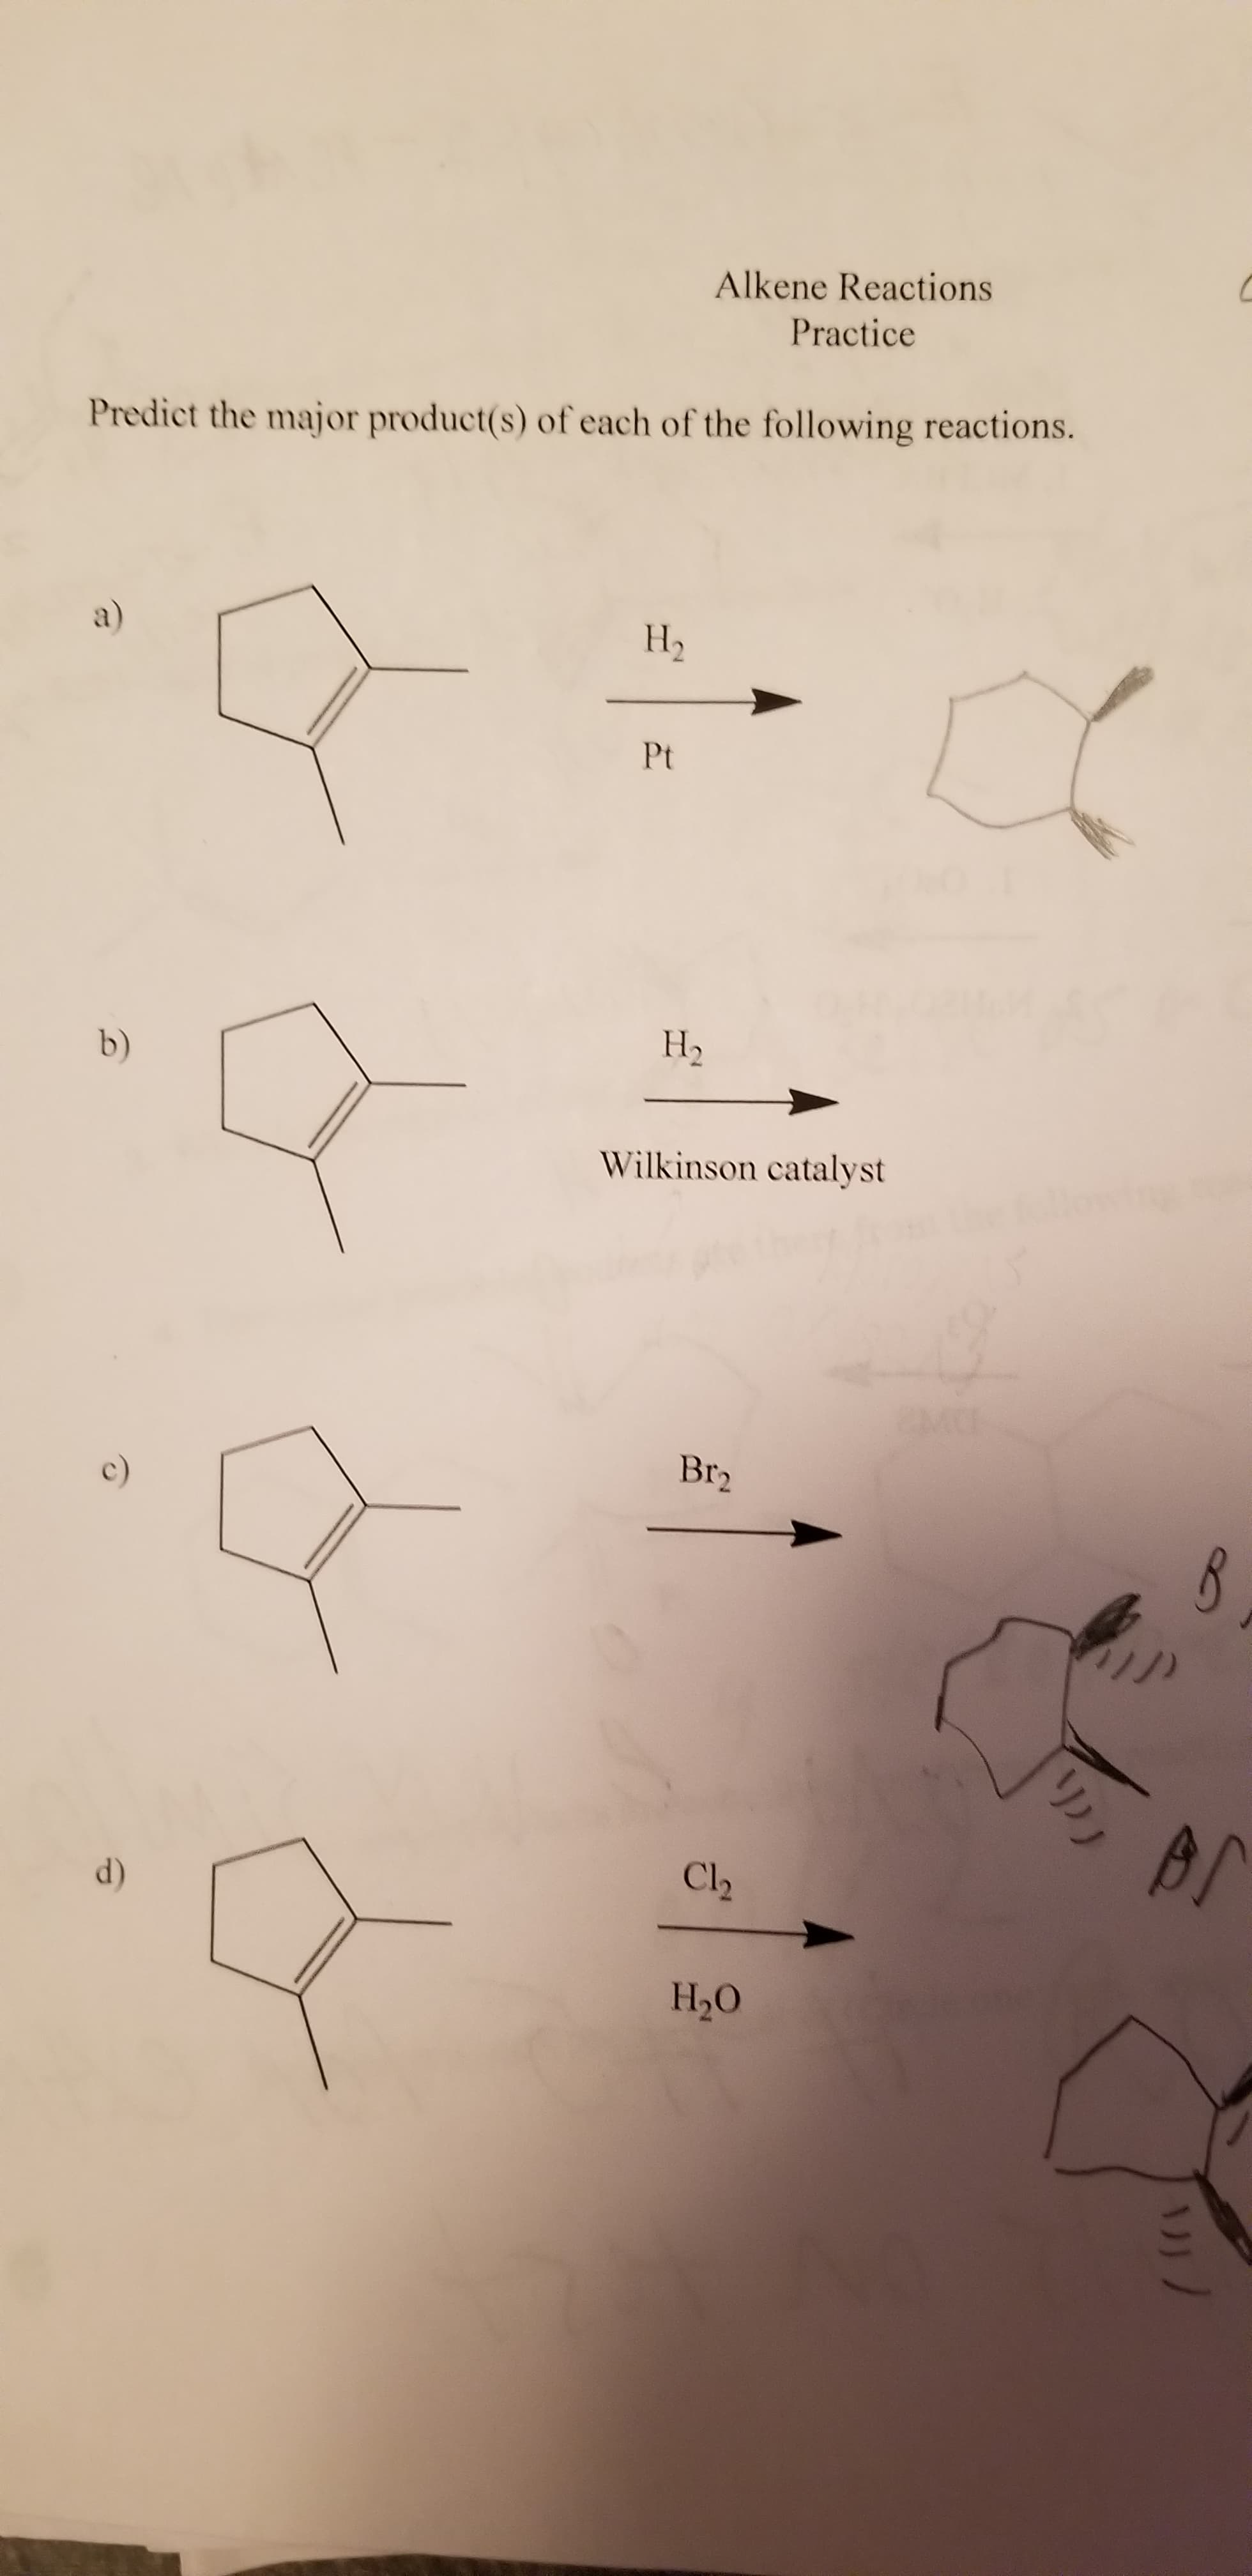 Alkene Reactions
Practice
Predict the major product(s) of each of the following reactions.
a)
H2
Pt
H2
b)
Wilkinson catalyst
Br2
Cl2
d)
H2O
リリ
1)
